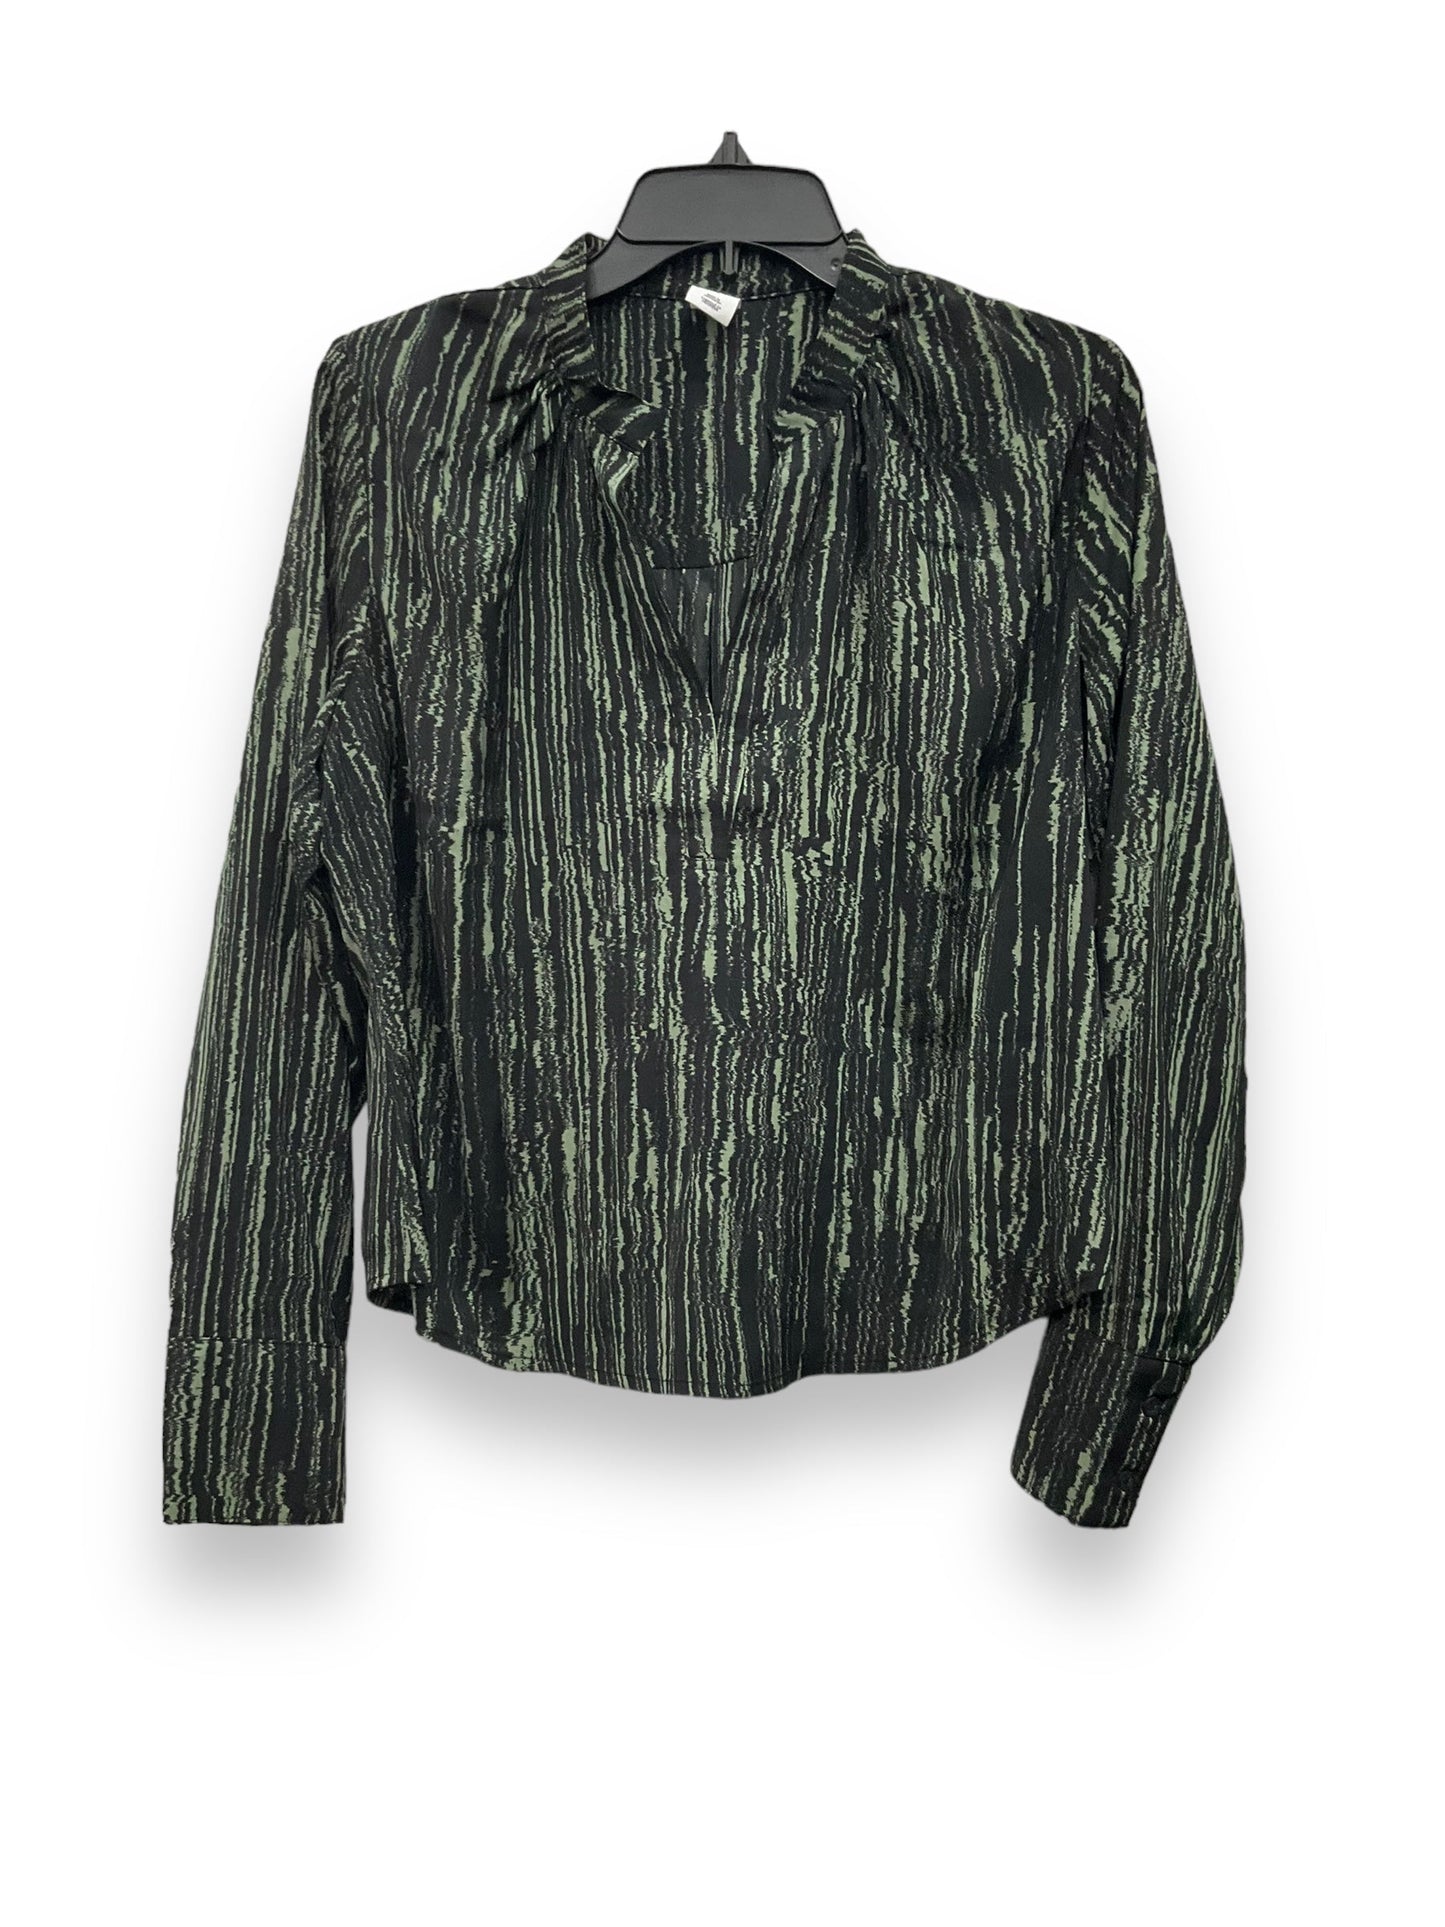 Black & Green Blouse Long Sleeve Melrose And Market, Size M